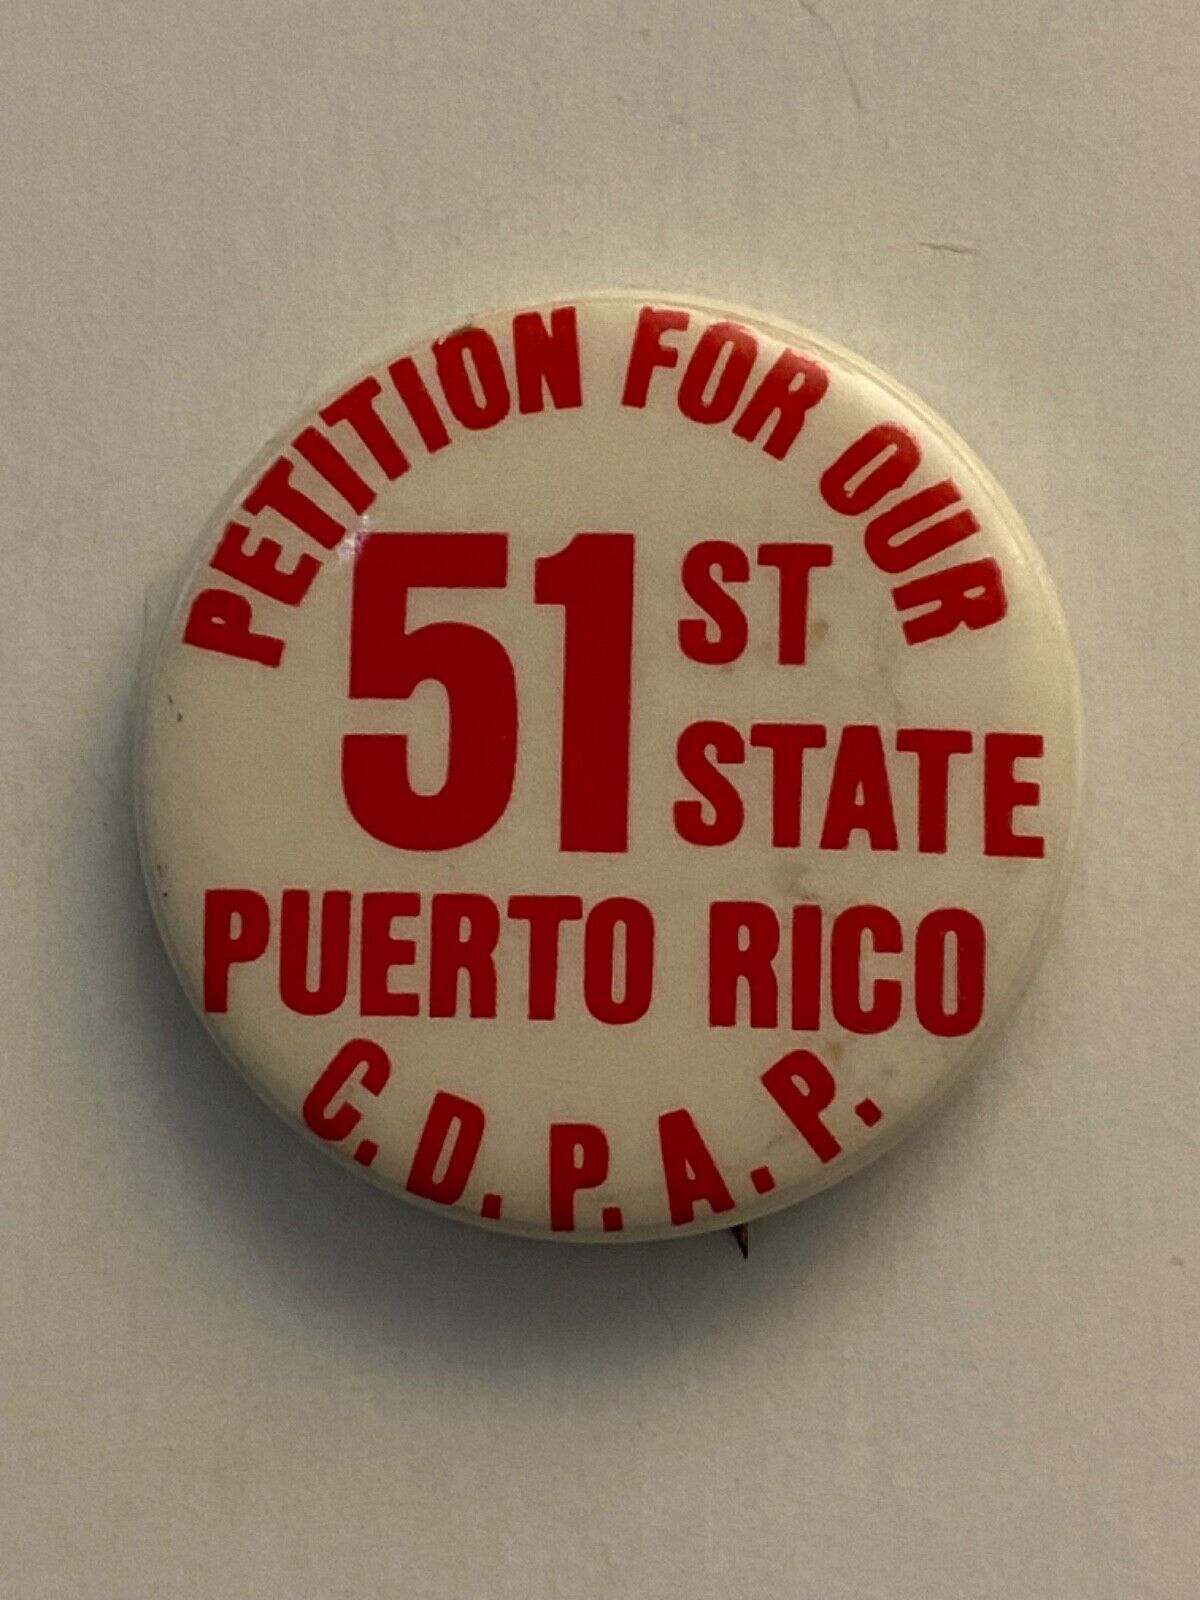 Petition For Our 51st State Puerto Rico C.D.P.A.P. political cause pin